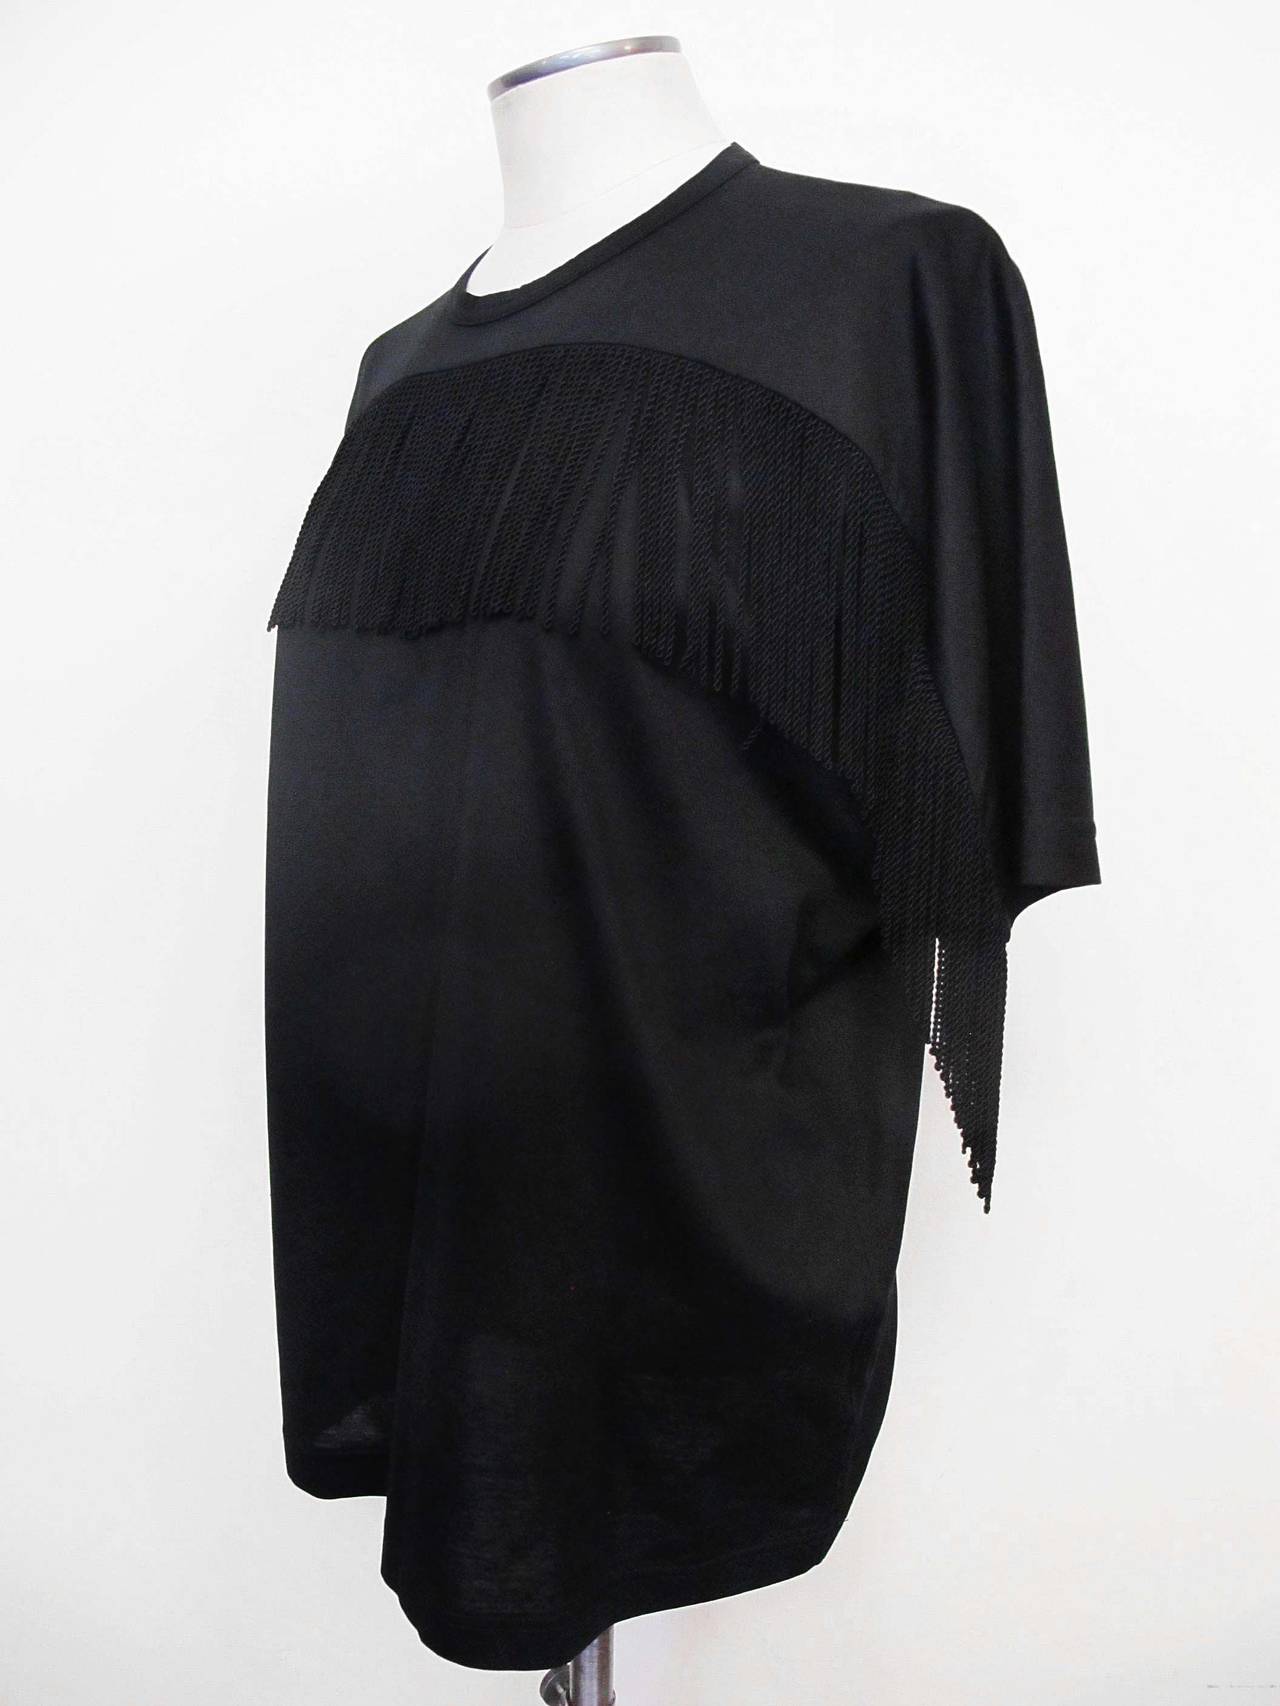 Black Junya Watanabe for Comme des Garcons T-Shirt - Blouse with a Twist For Sale